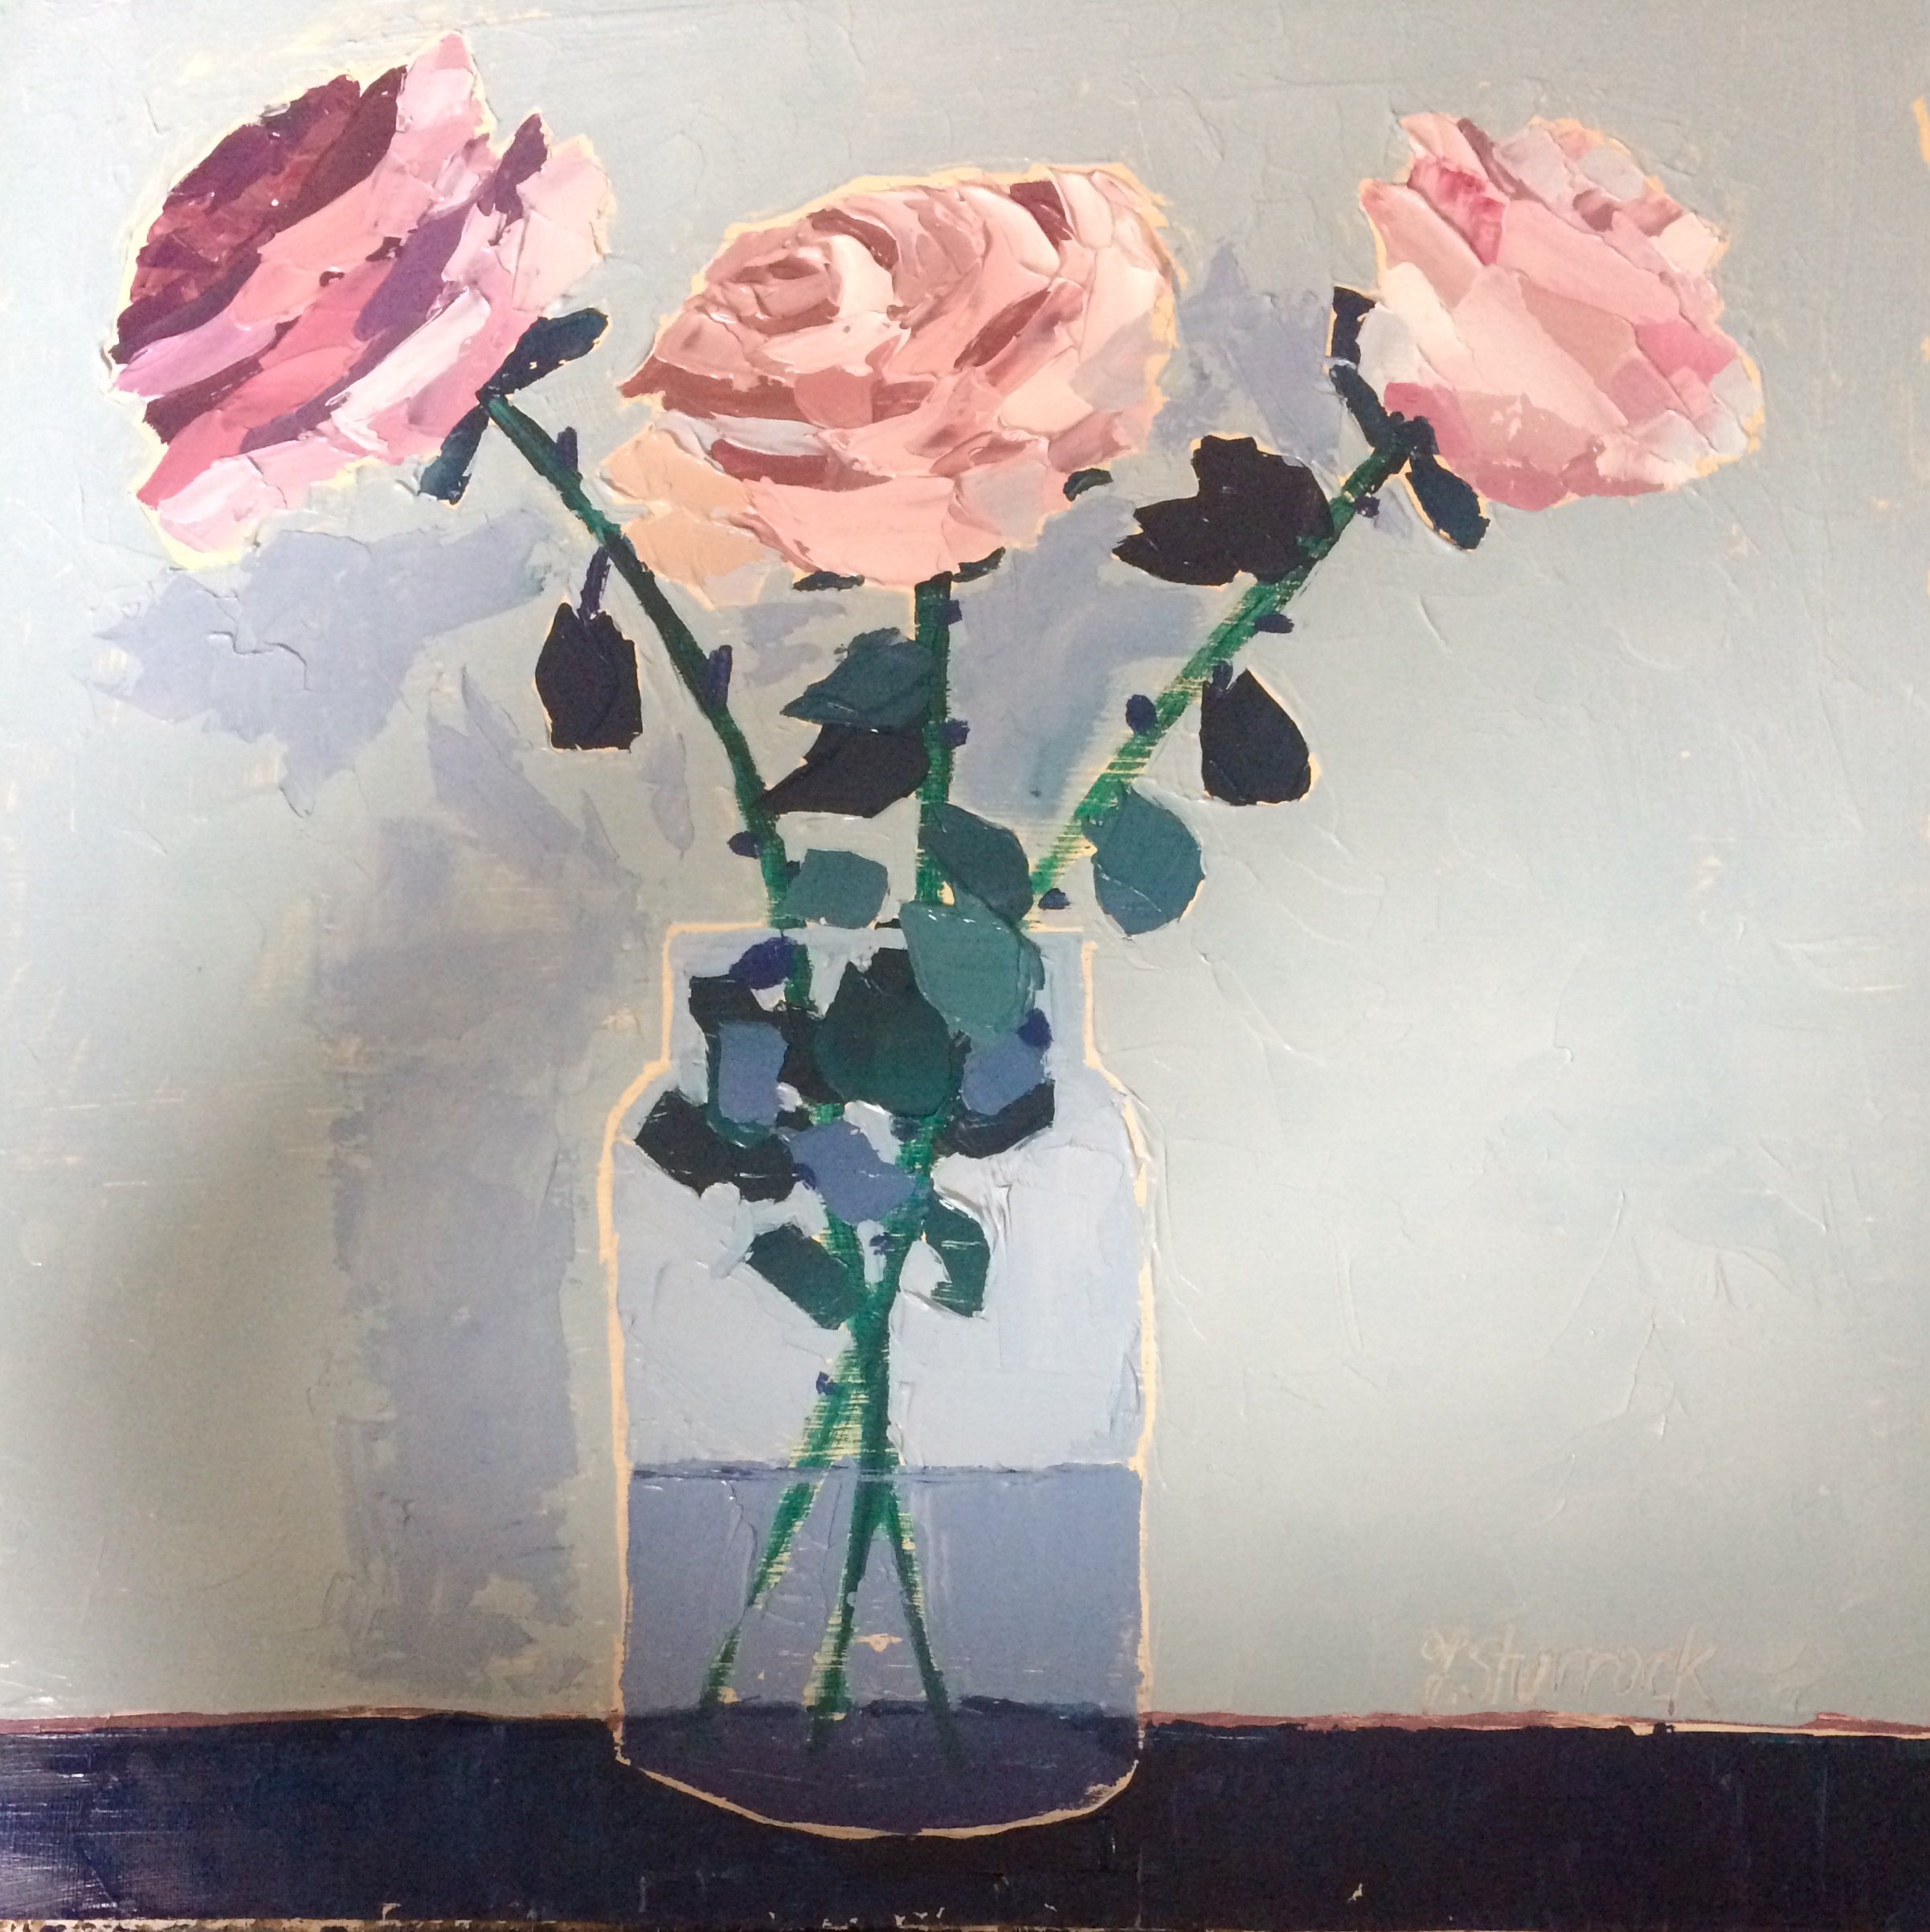 'Three Pink Roses' by artist Fiona Sturrock